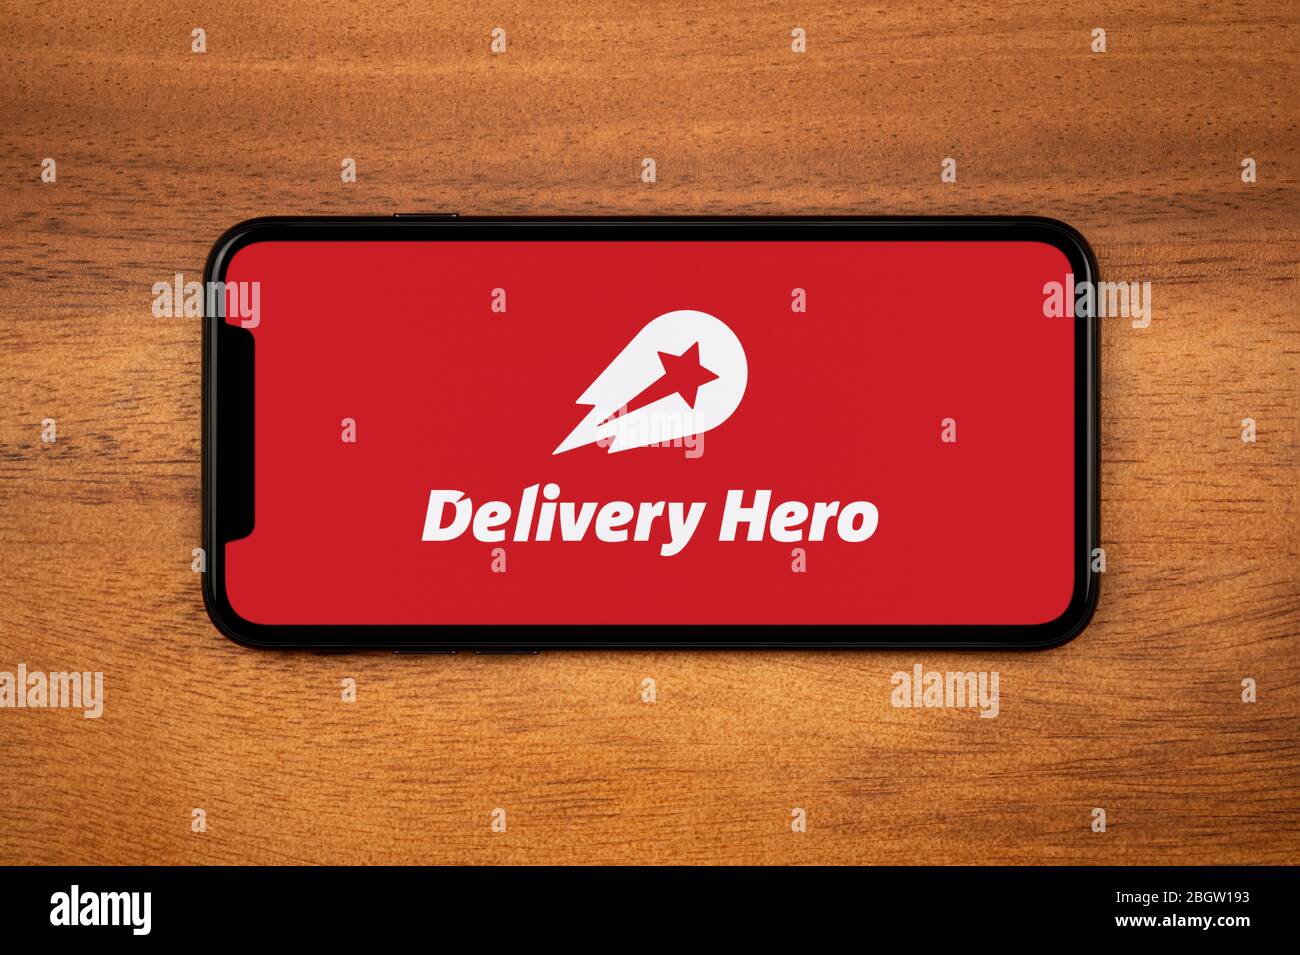 A smartphone showing the Delivery Hero logo rests on a plain wooden table (Editorial use only). Stock Photo